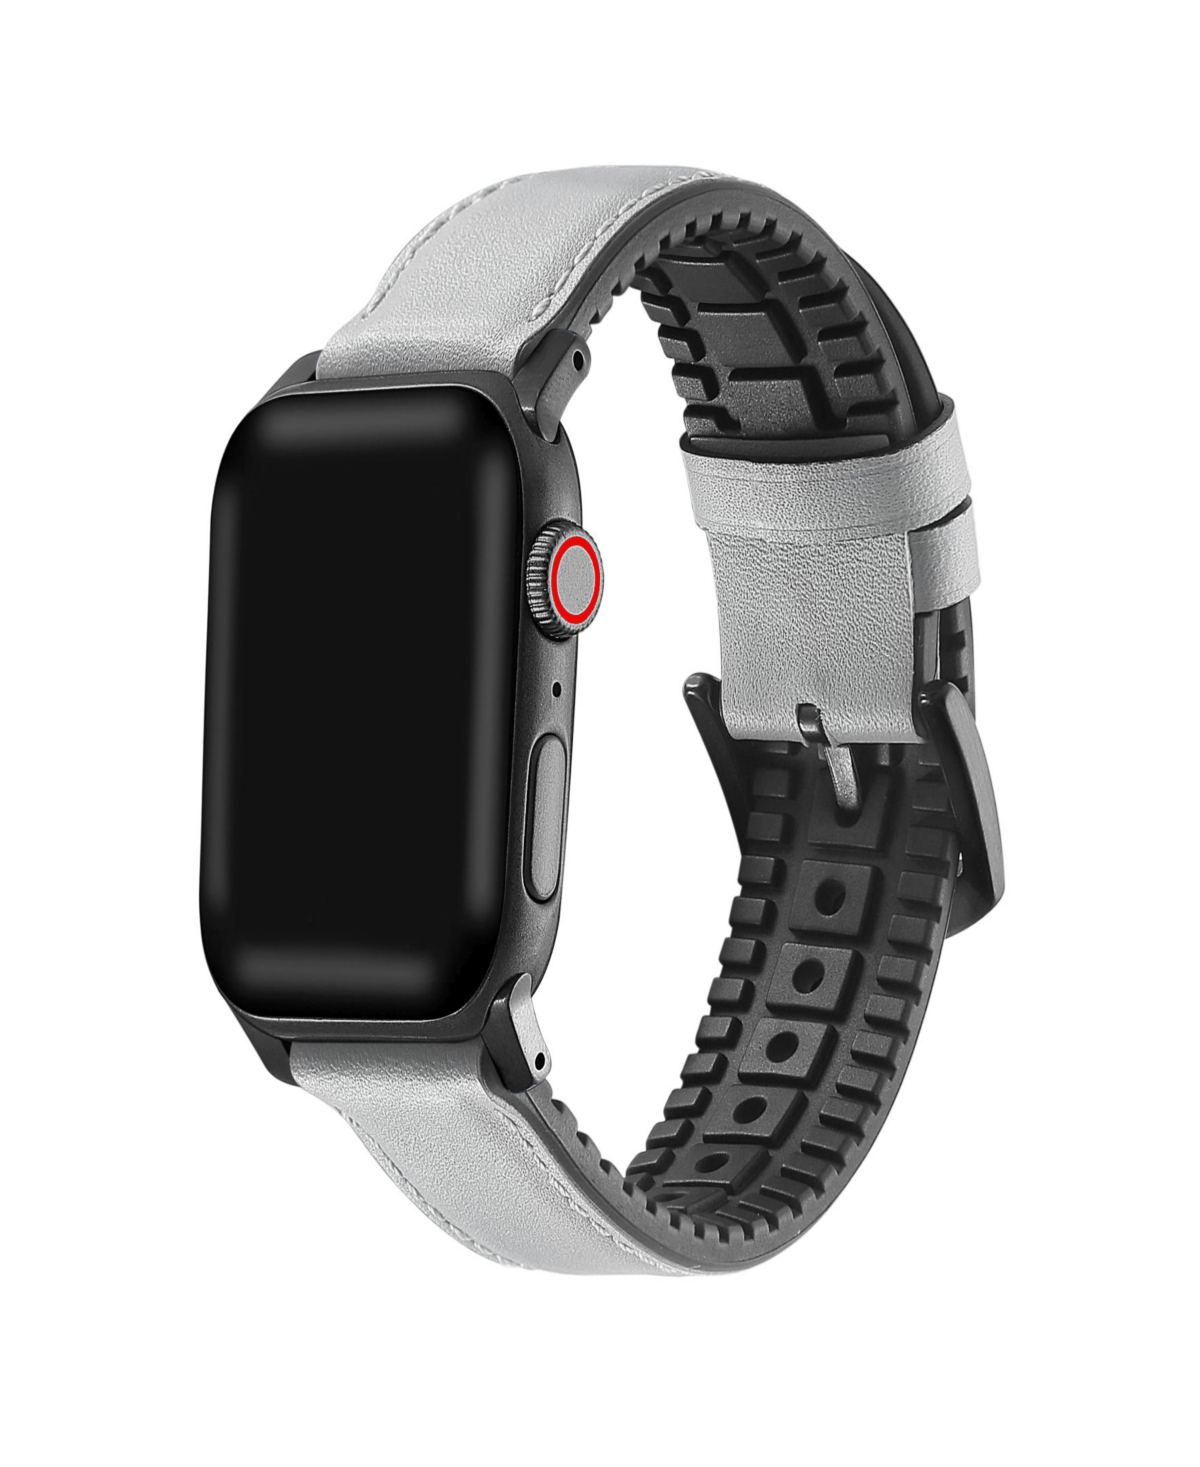 Men's and Women's Genuine Gray Leather Band with Silicone Back for Apple Watch 38mm - Gray